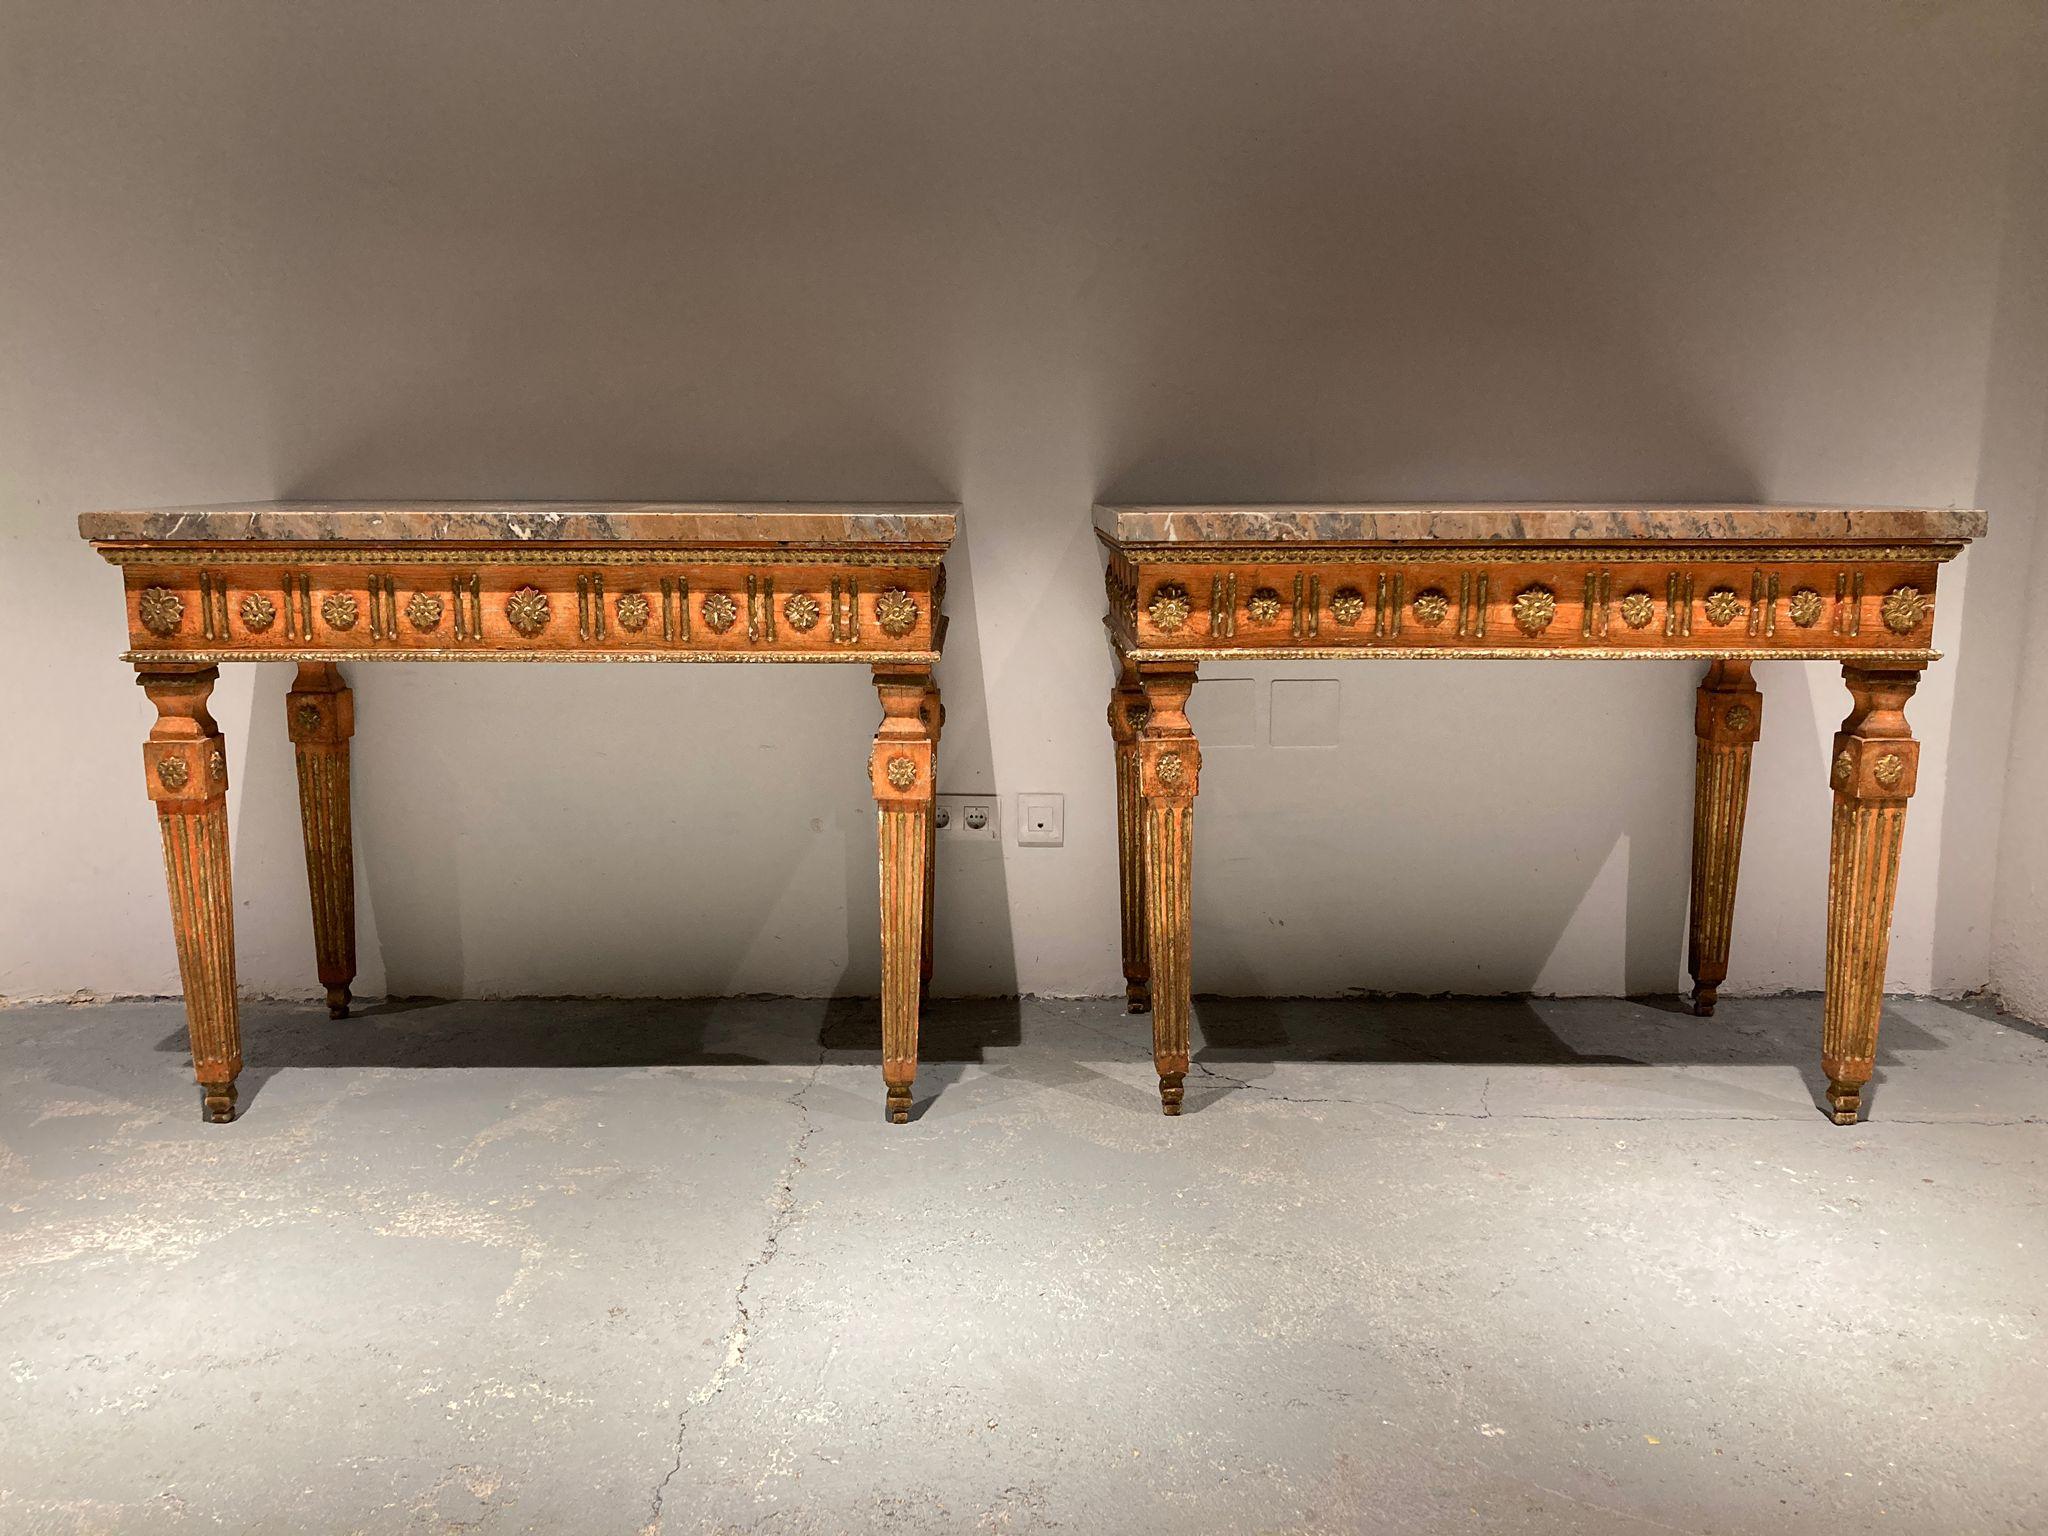 Incredible pair of Neapolitan consoles from the time of King Carlos III.
They stand out for their large size and majesty, being a couple of unique tables.
Its colors and the robustness of its design mean that it can fit into very diverse